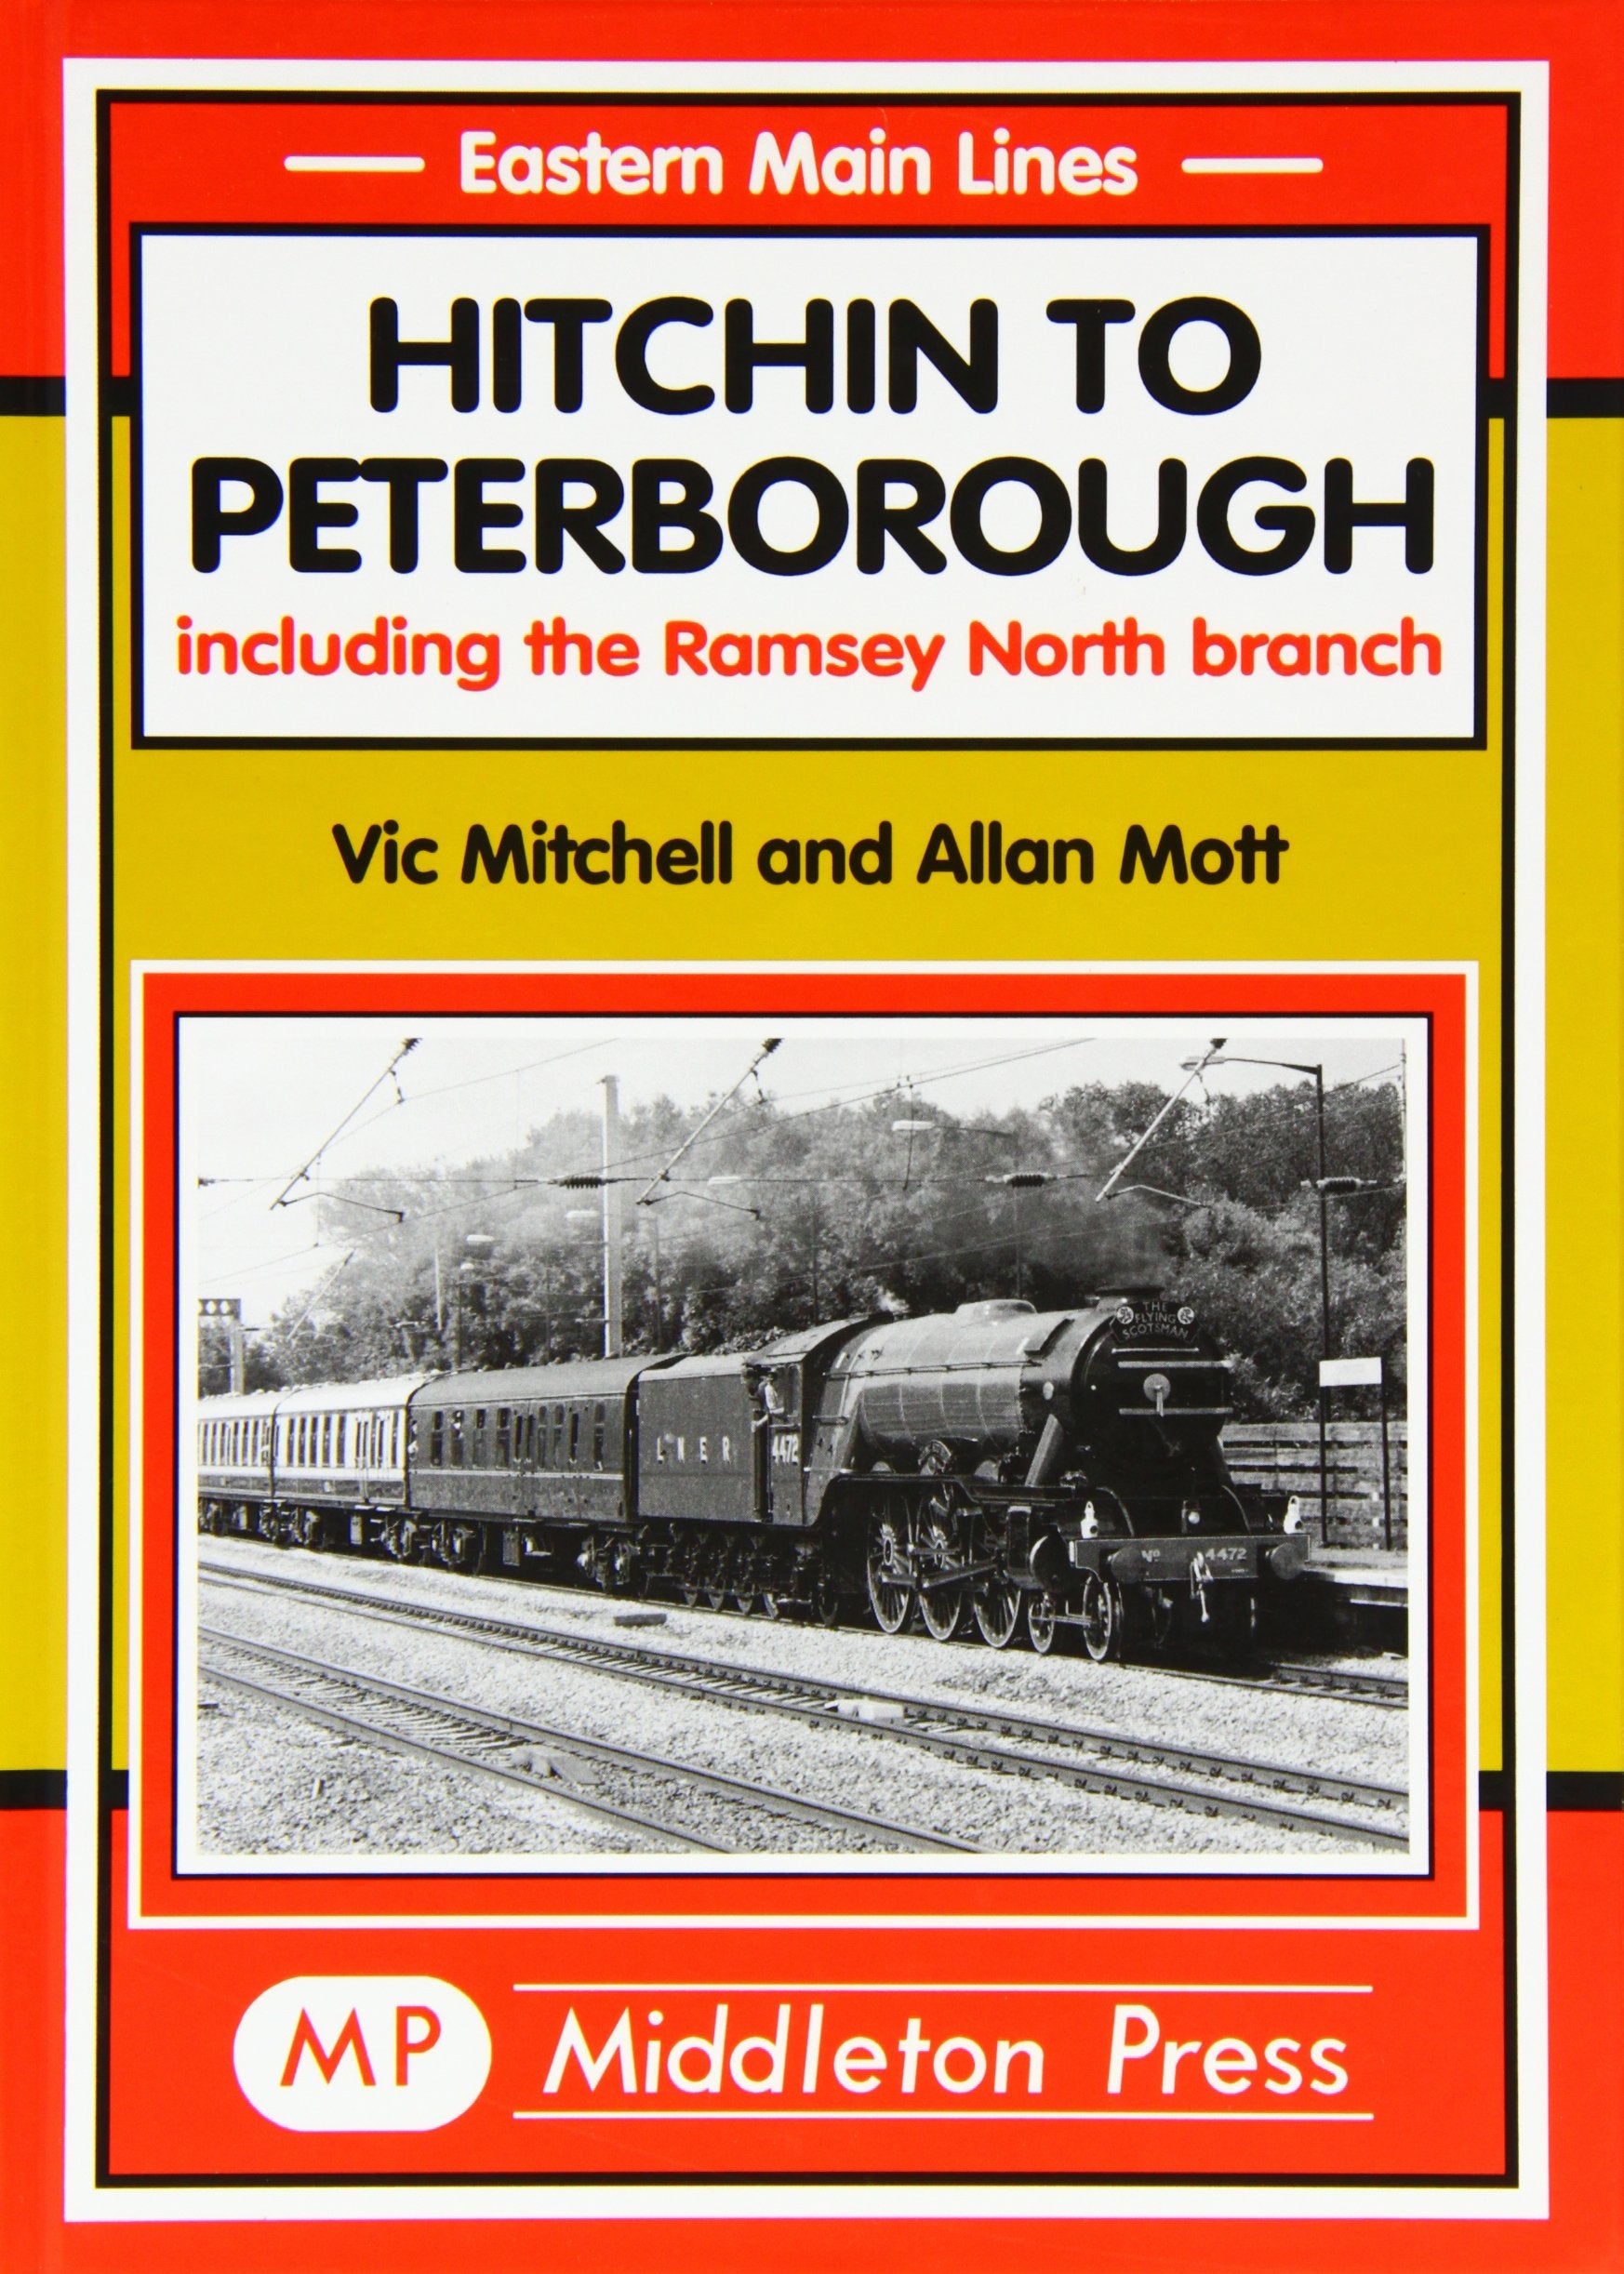 Eastern Main Lines Hitchin to Peterborough including the Ramsey North Branch OUT OF PRINT TO BE REPRINTED